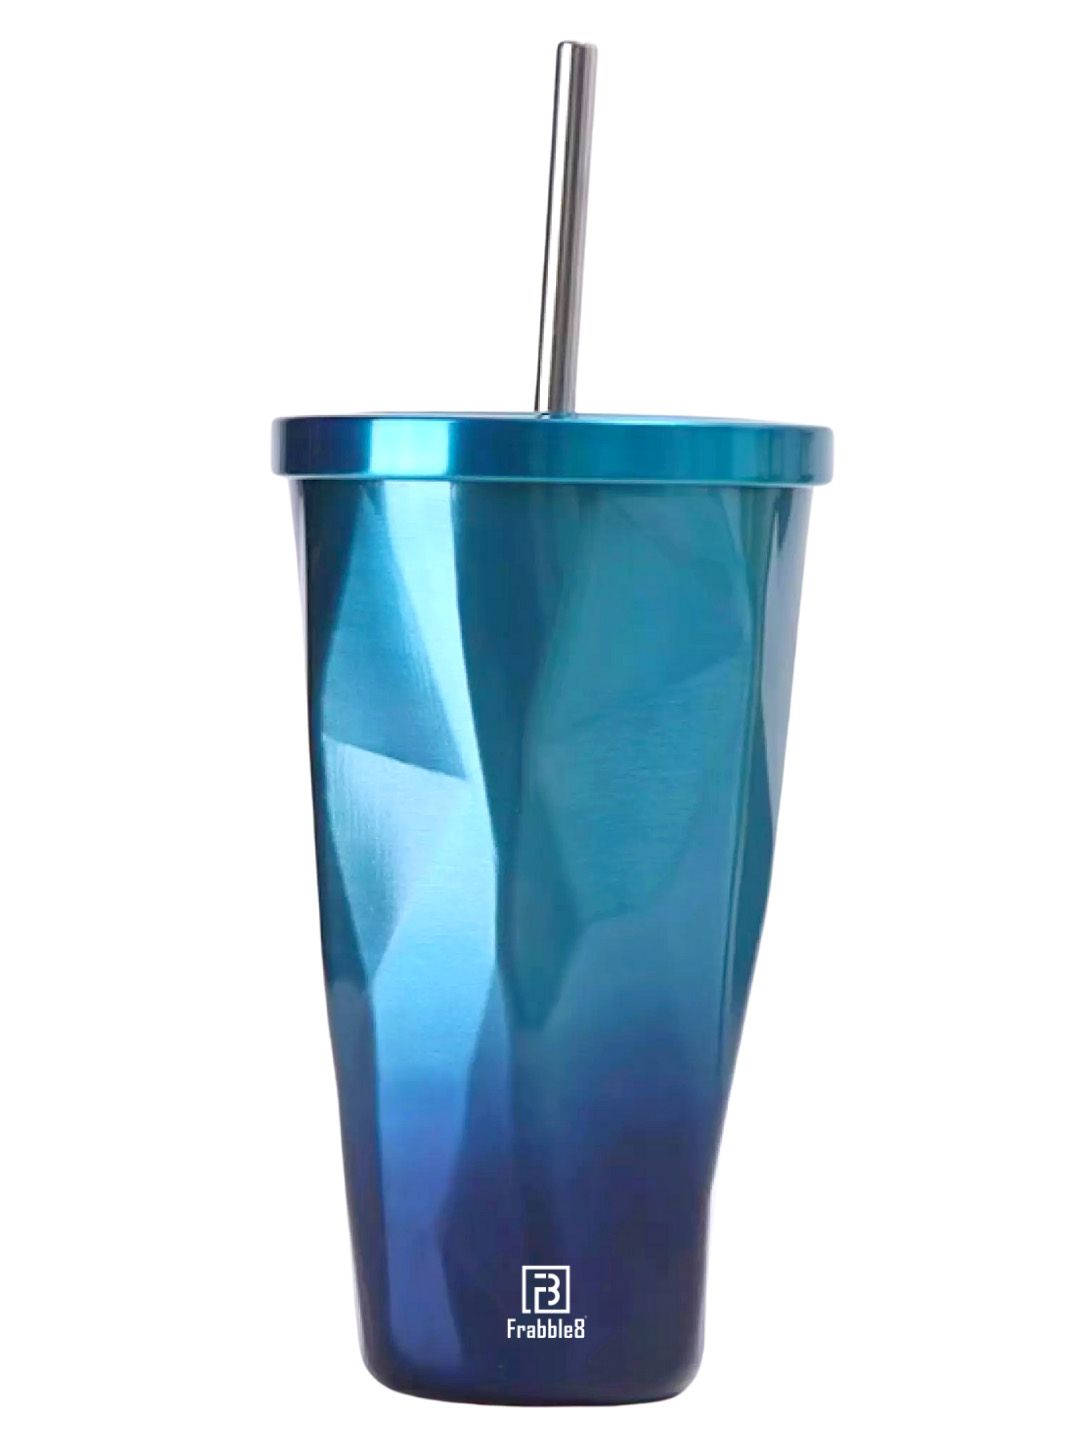 Frabble8 Blue Vacuum Insulated Stainless Steel Tumbler with Steel Straw 500 ml Price in India